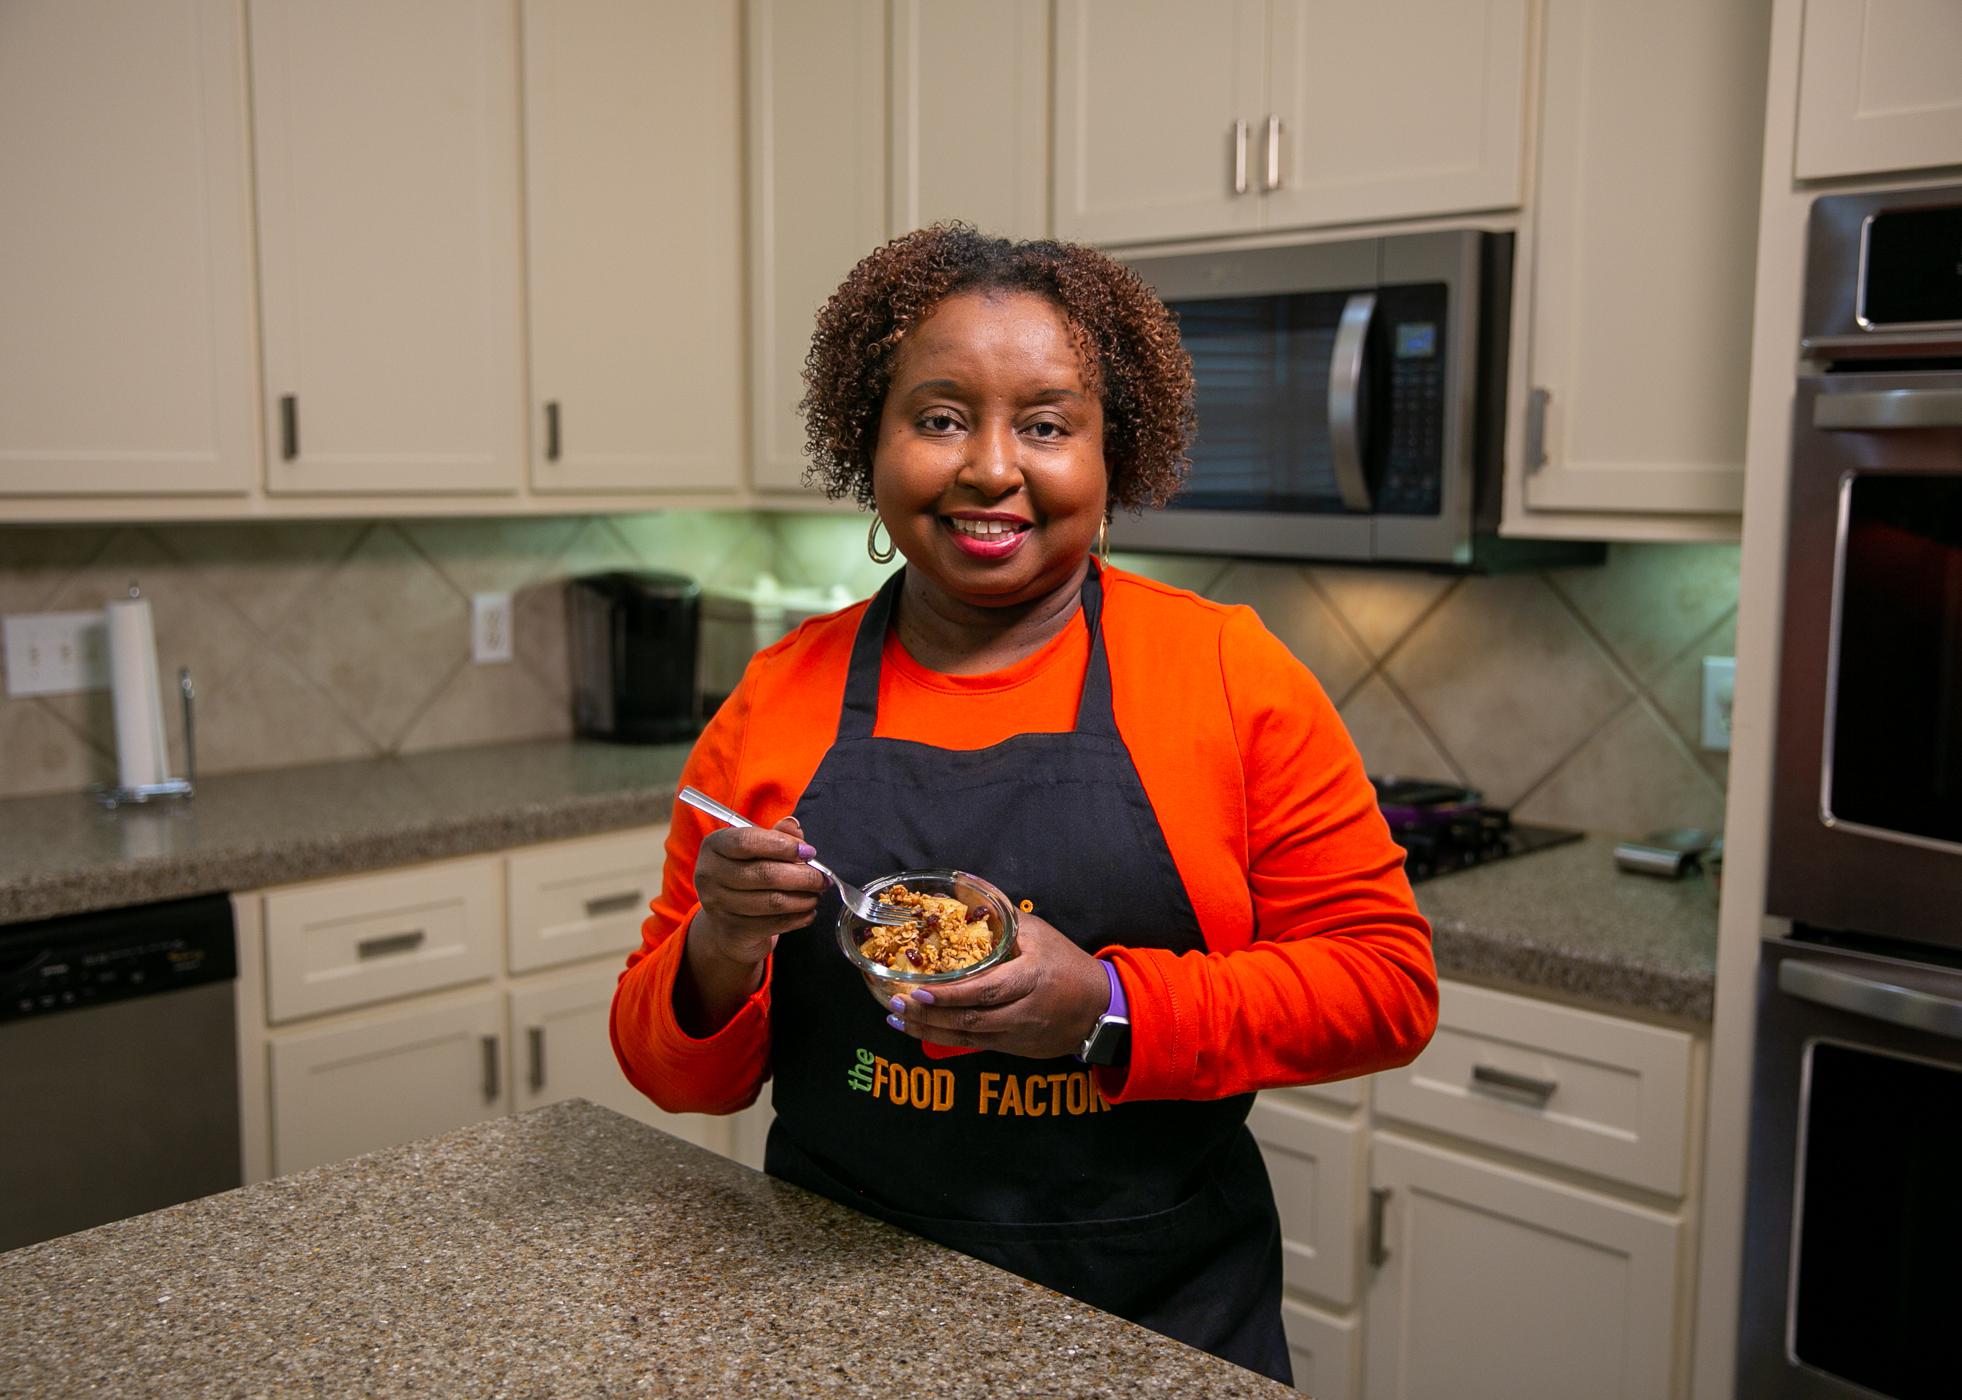 A woman stands in a kitchen and holds a bowl of Cinnamon Fried Pineapple